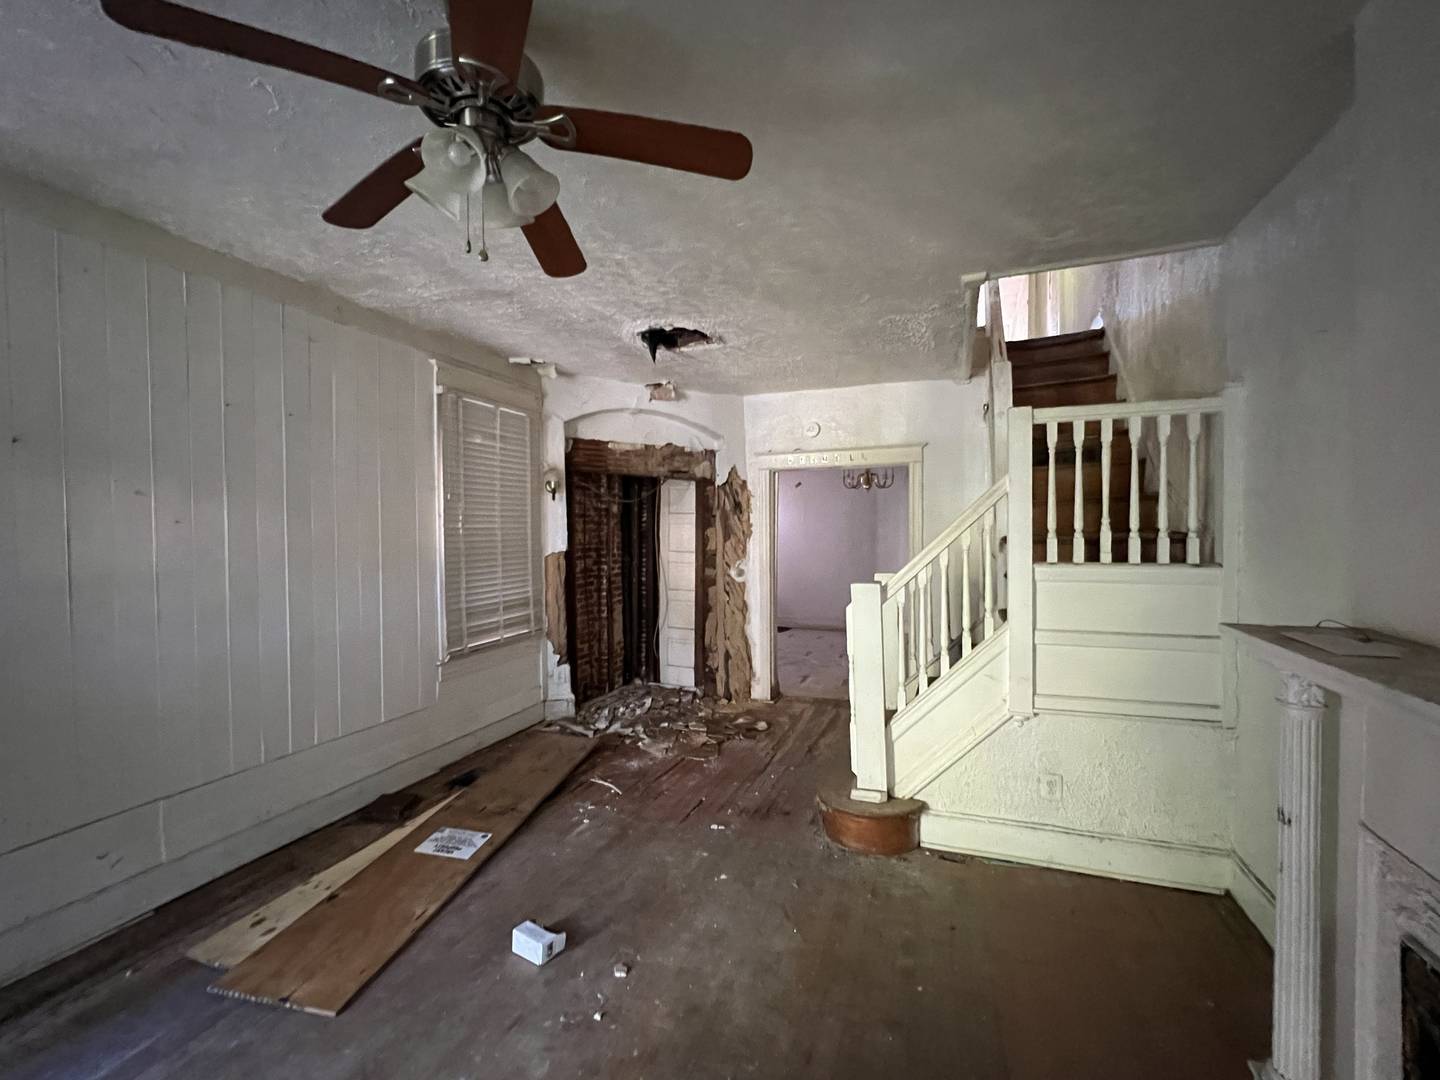 The interior of a West Baltimore home, located in the Rosemont neighborhood, bought by an ABC Capital investor. The locks were being changed by a man who said the home is going to tax auction.